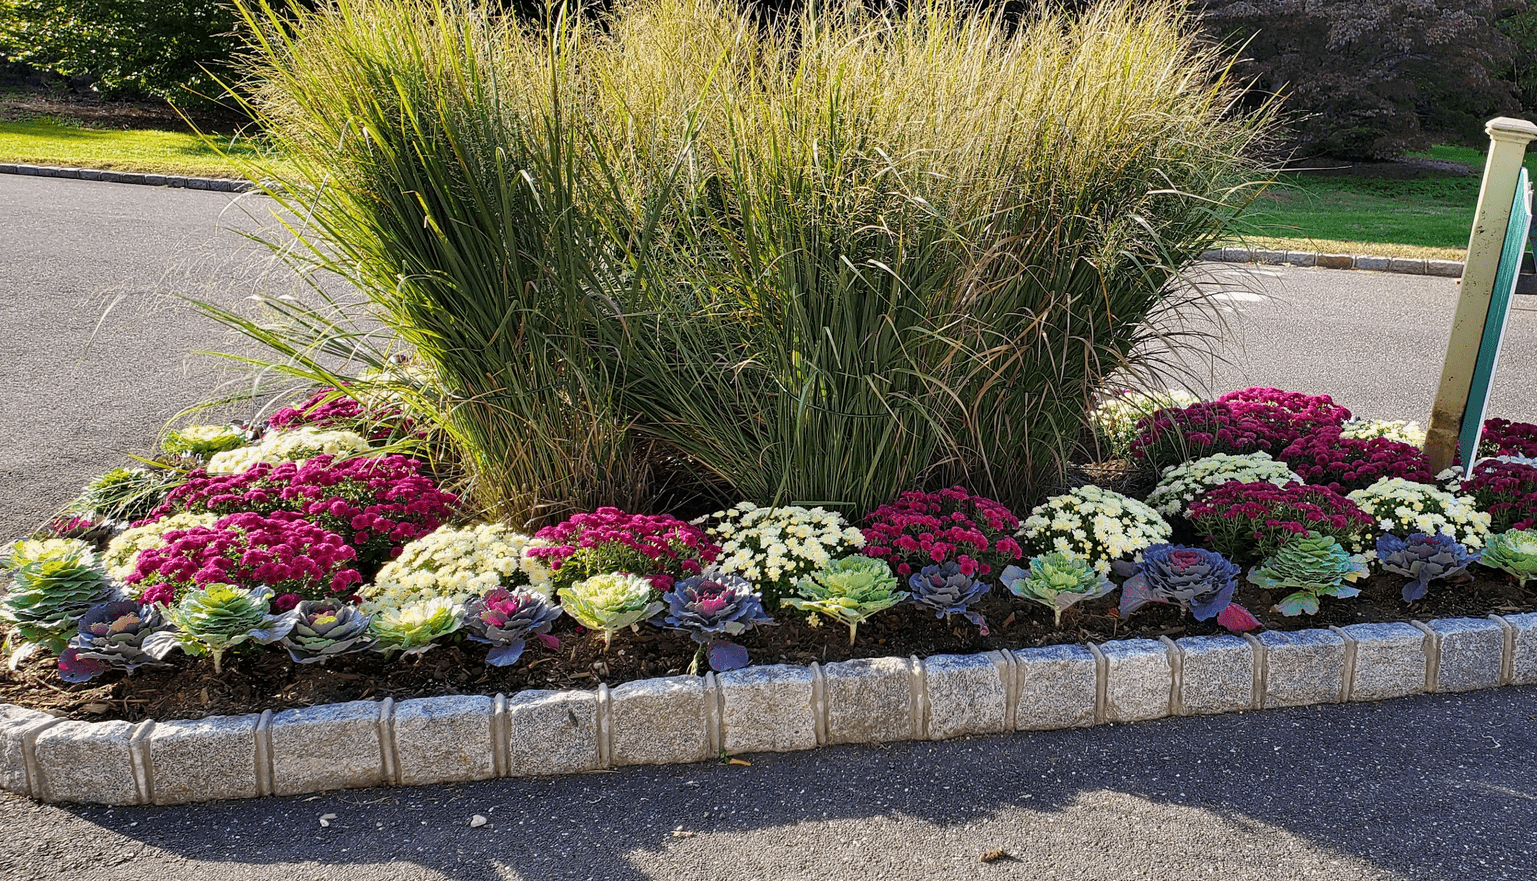 planting flower and ornamental grasses